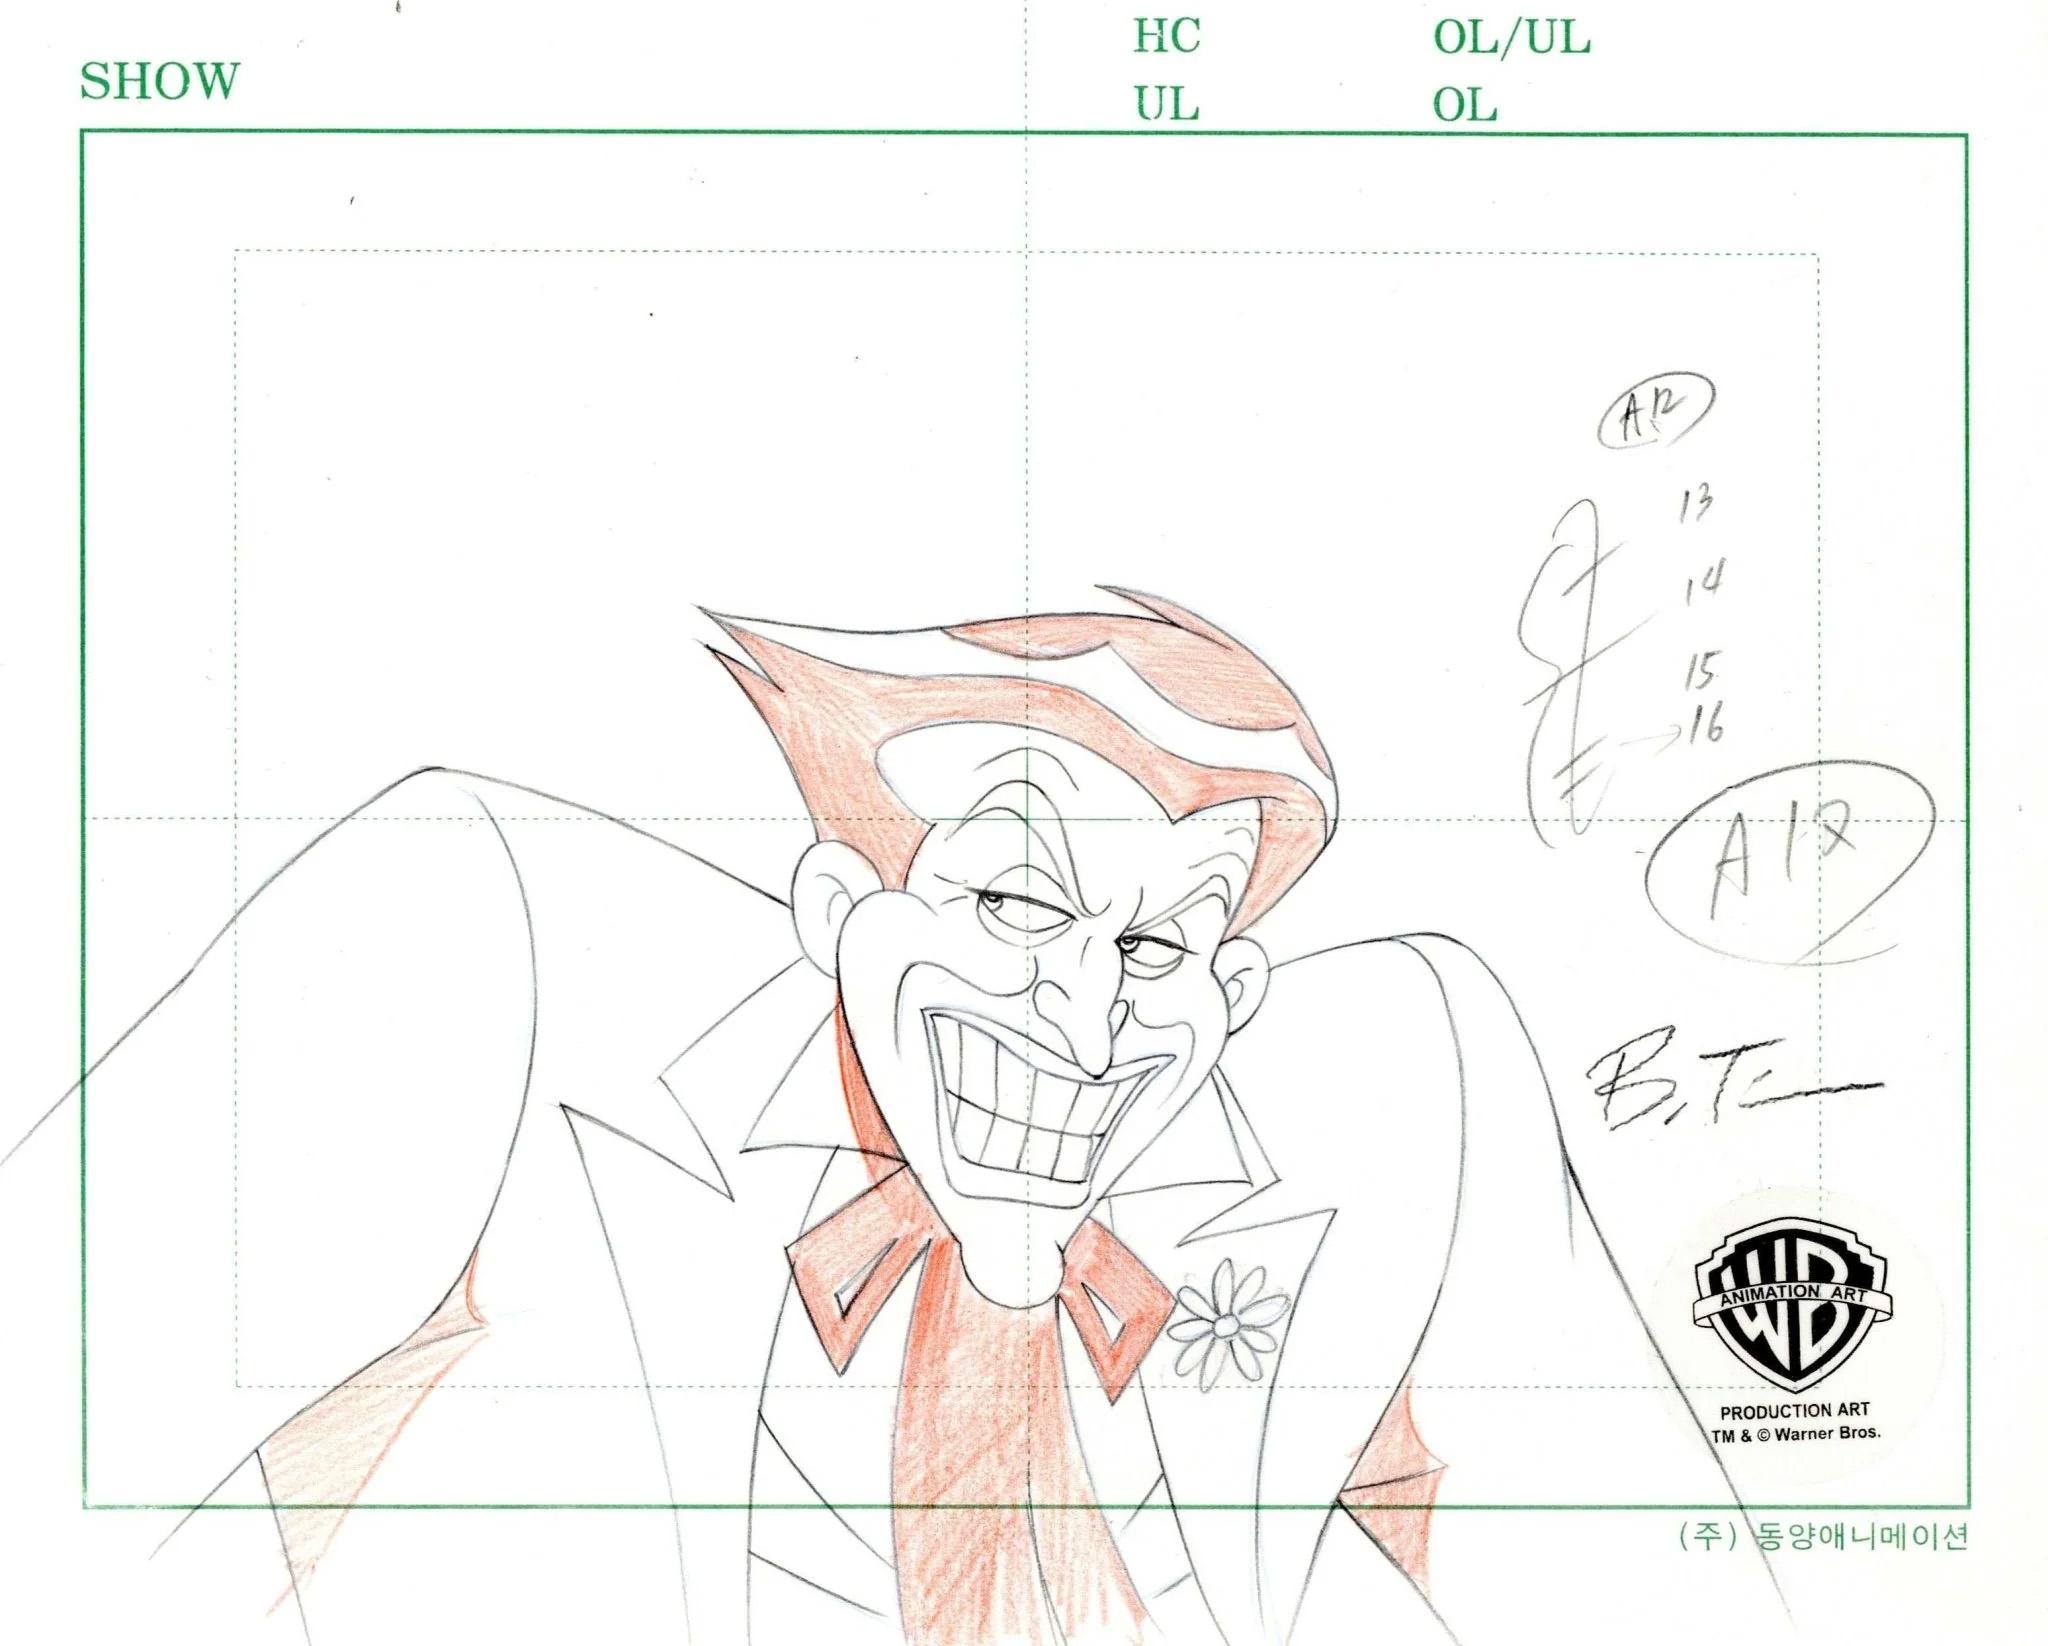 The New Batman Adventures Production Drawing signed by Bruce Timm: Joker - Art by DC Comics Studio Artists